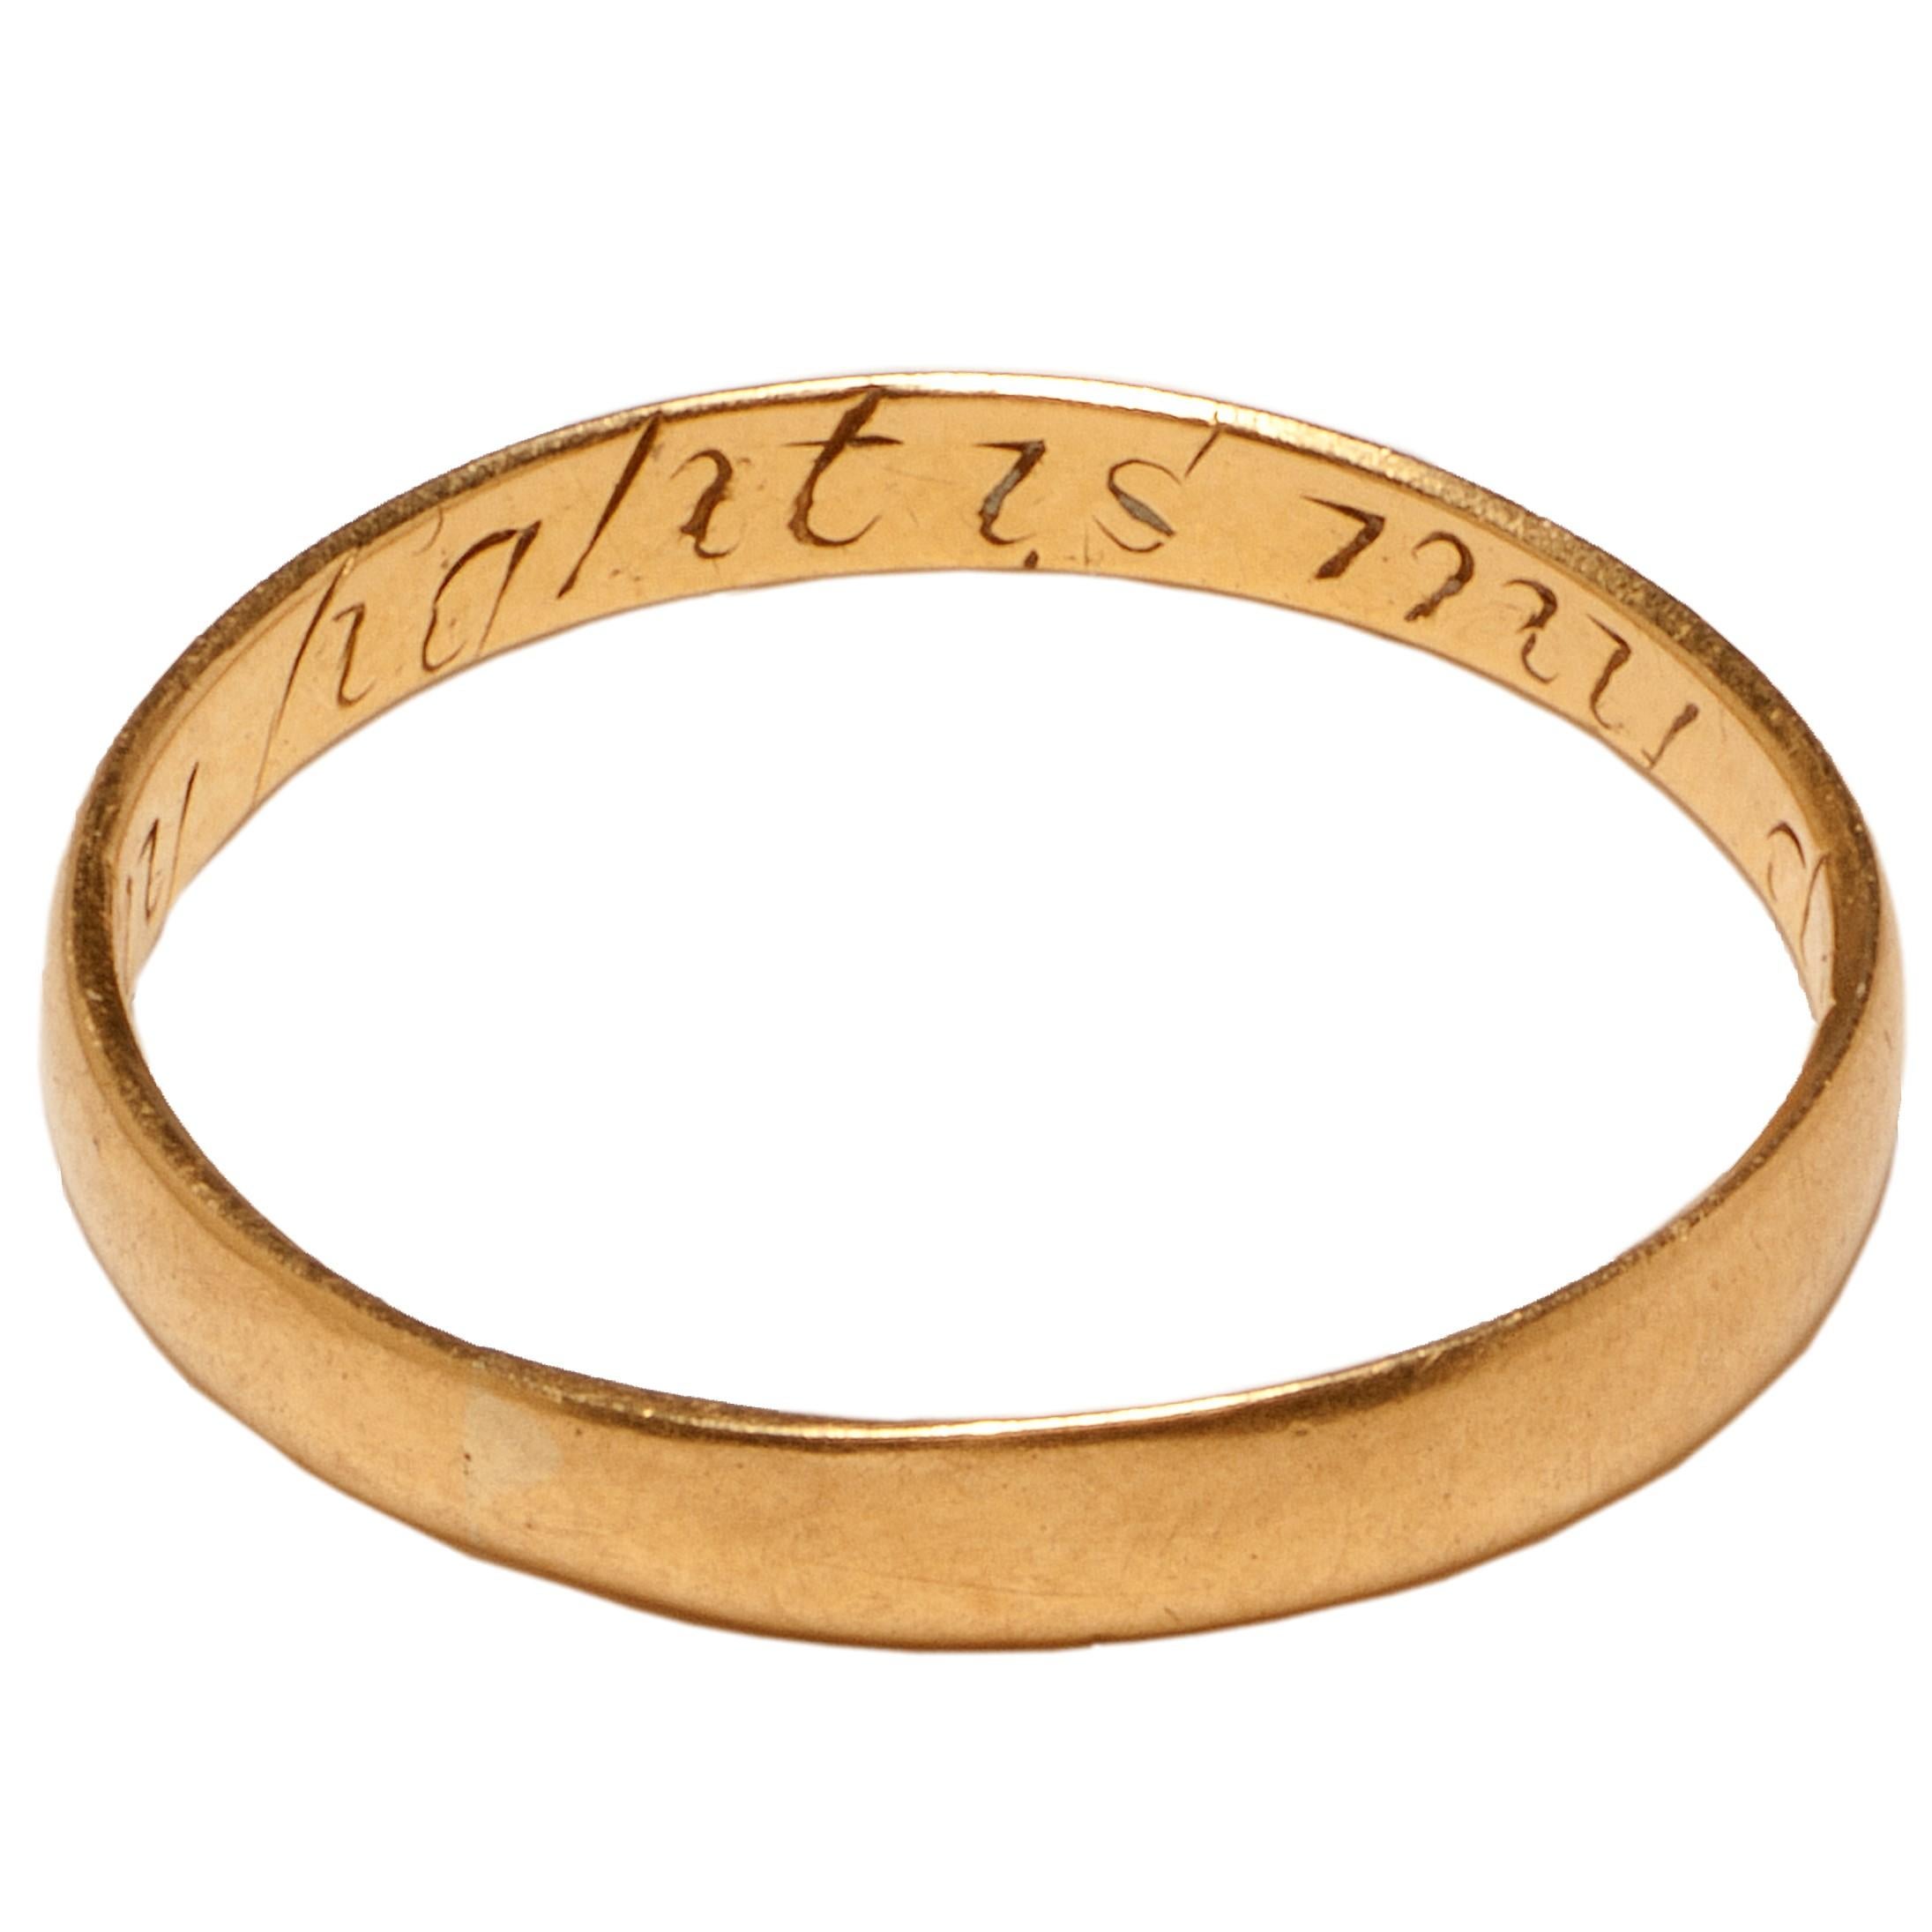 POSY RING “IN THY SIGHT IS MY DELIGHT” 
England, mid-18th century 
Gold 
Weight: 1.4g; circumference: 51.8mm; size: US 6, UK L ½ 

Fine hoop with round exterior and flat interior. The motto “In thy Sight is my delight” is engraved in italics on the